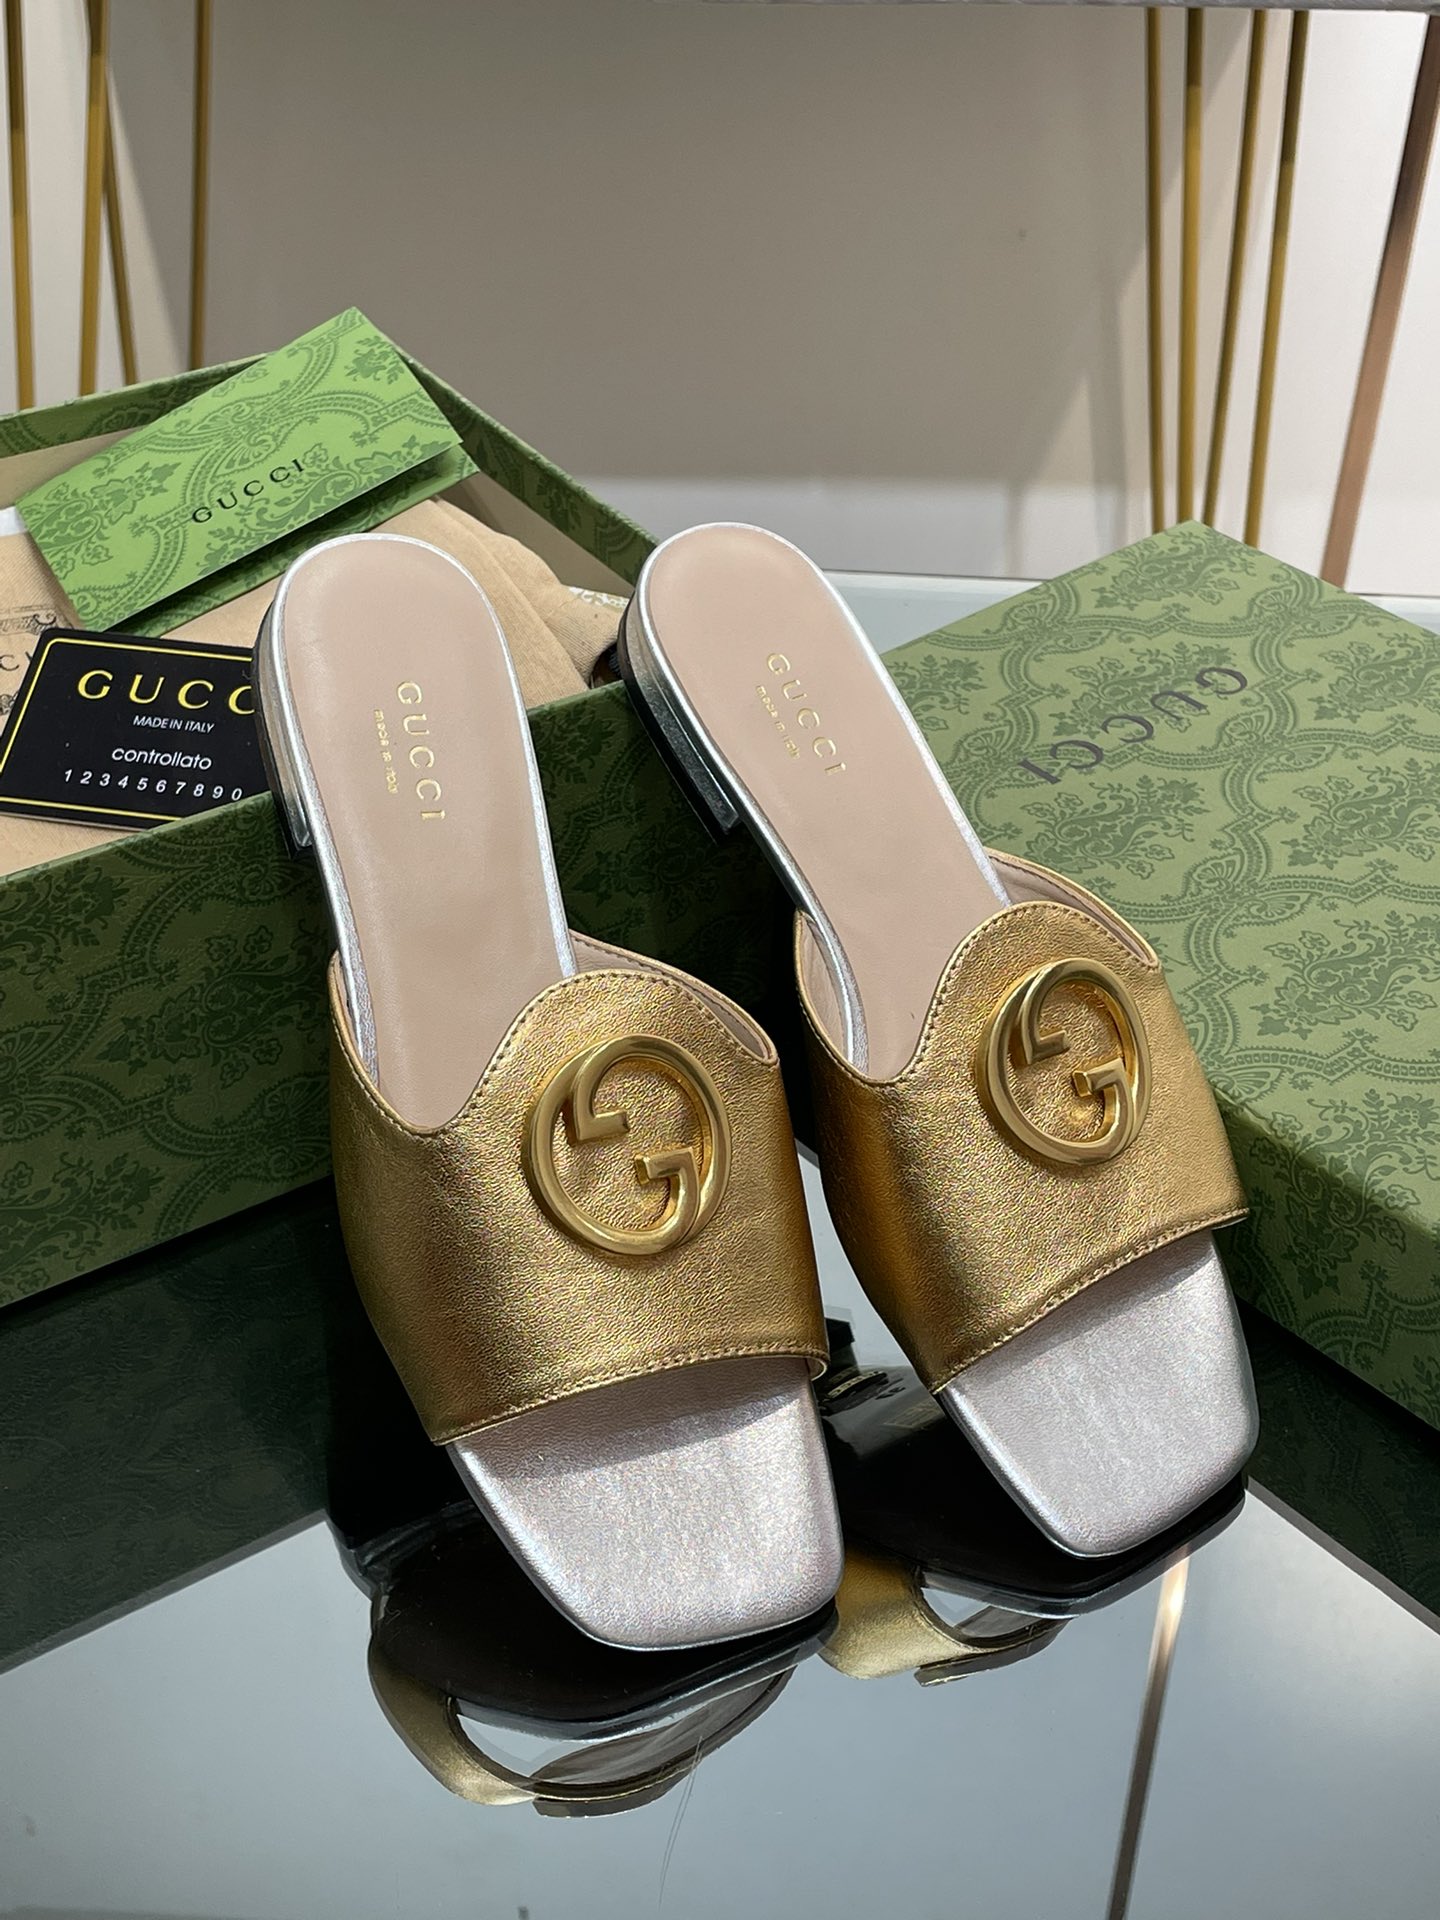 Gucci Shoes Slippers Green Genuine Leather Sheepskin Vintage